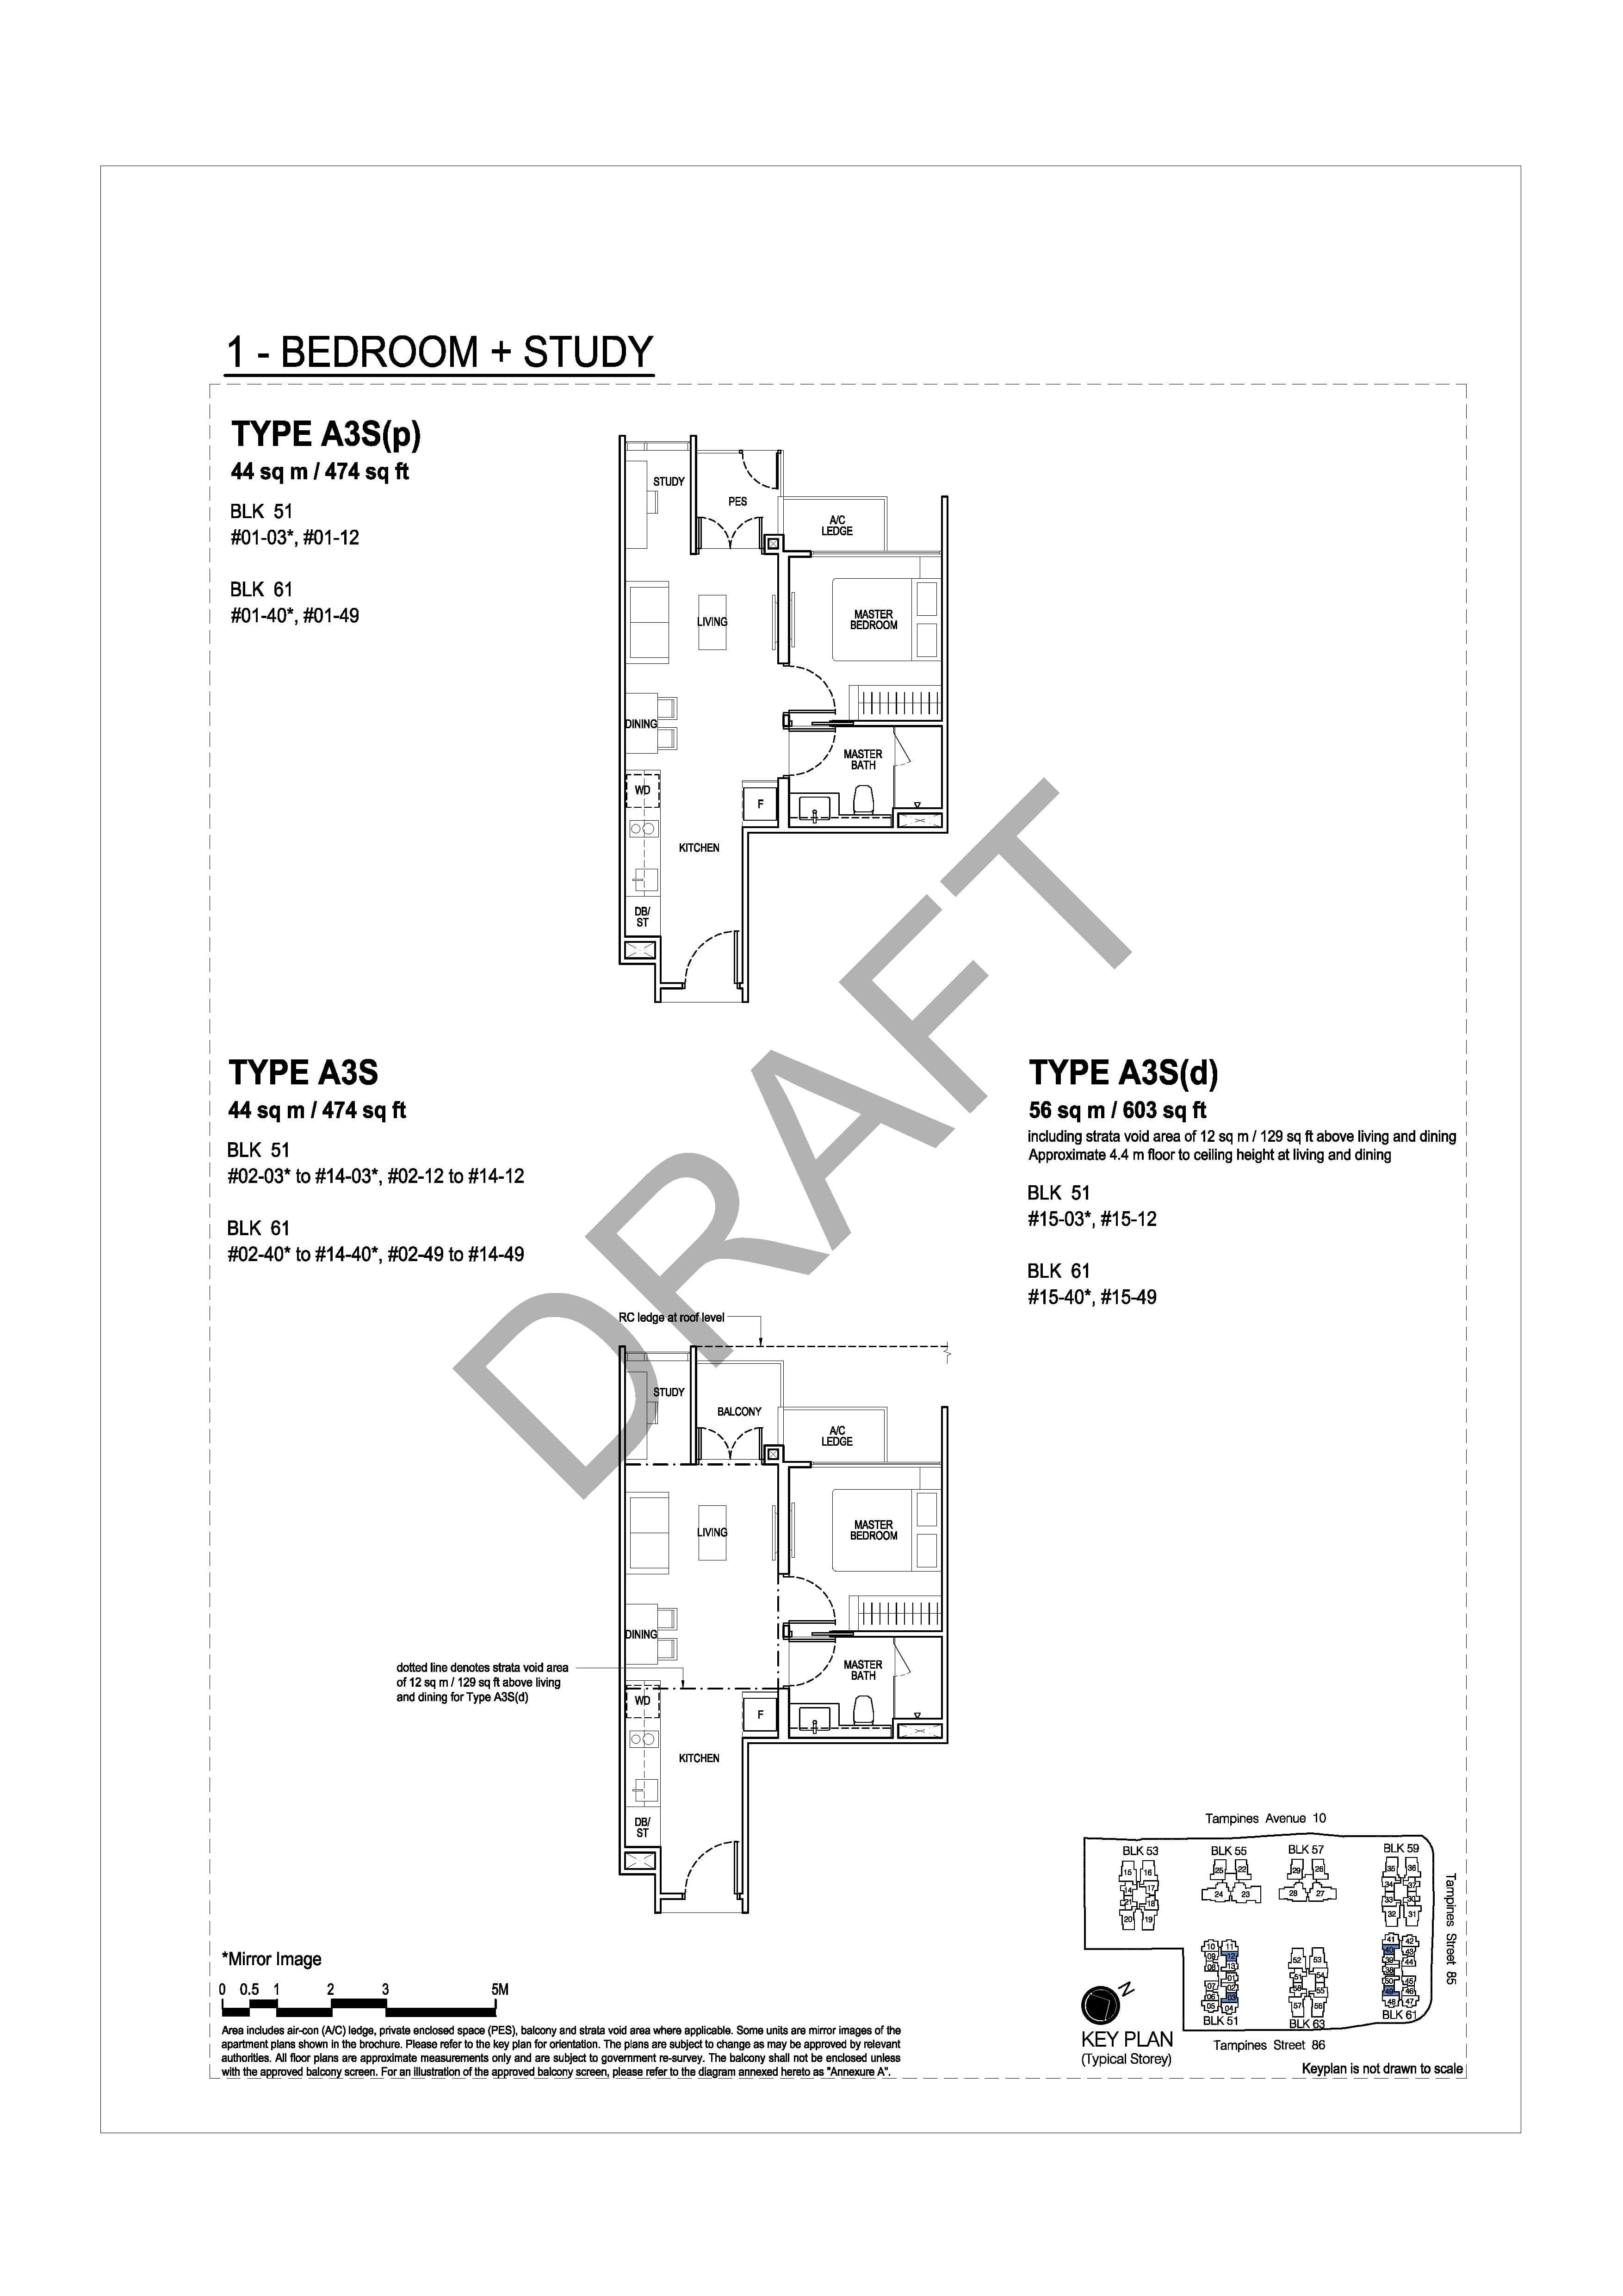 The Tapestry Floor Plans View Unit Distribution For All Bedroom Layouts